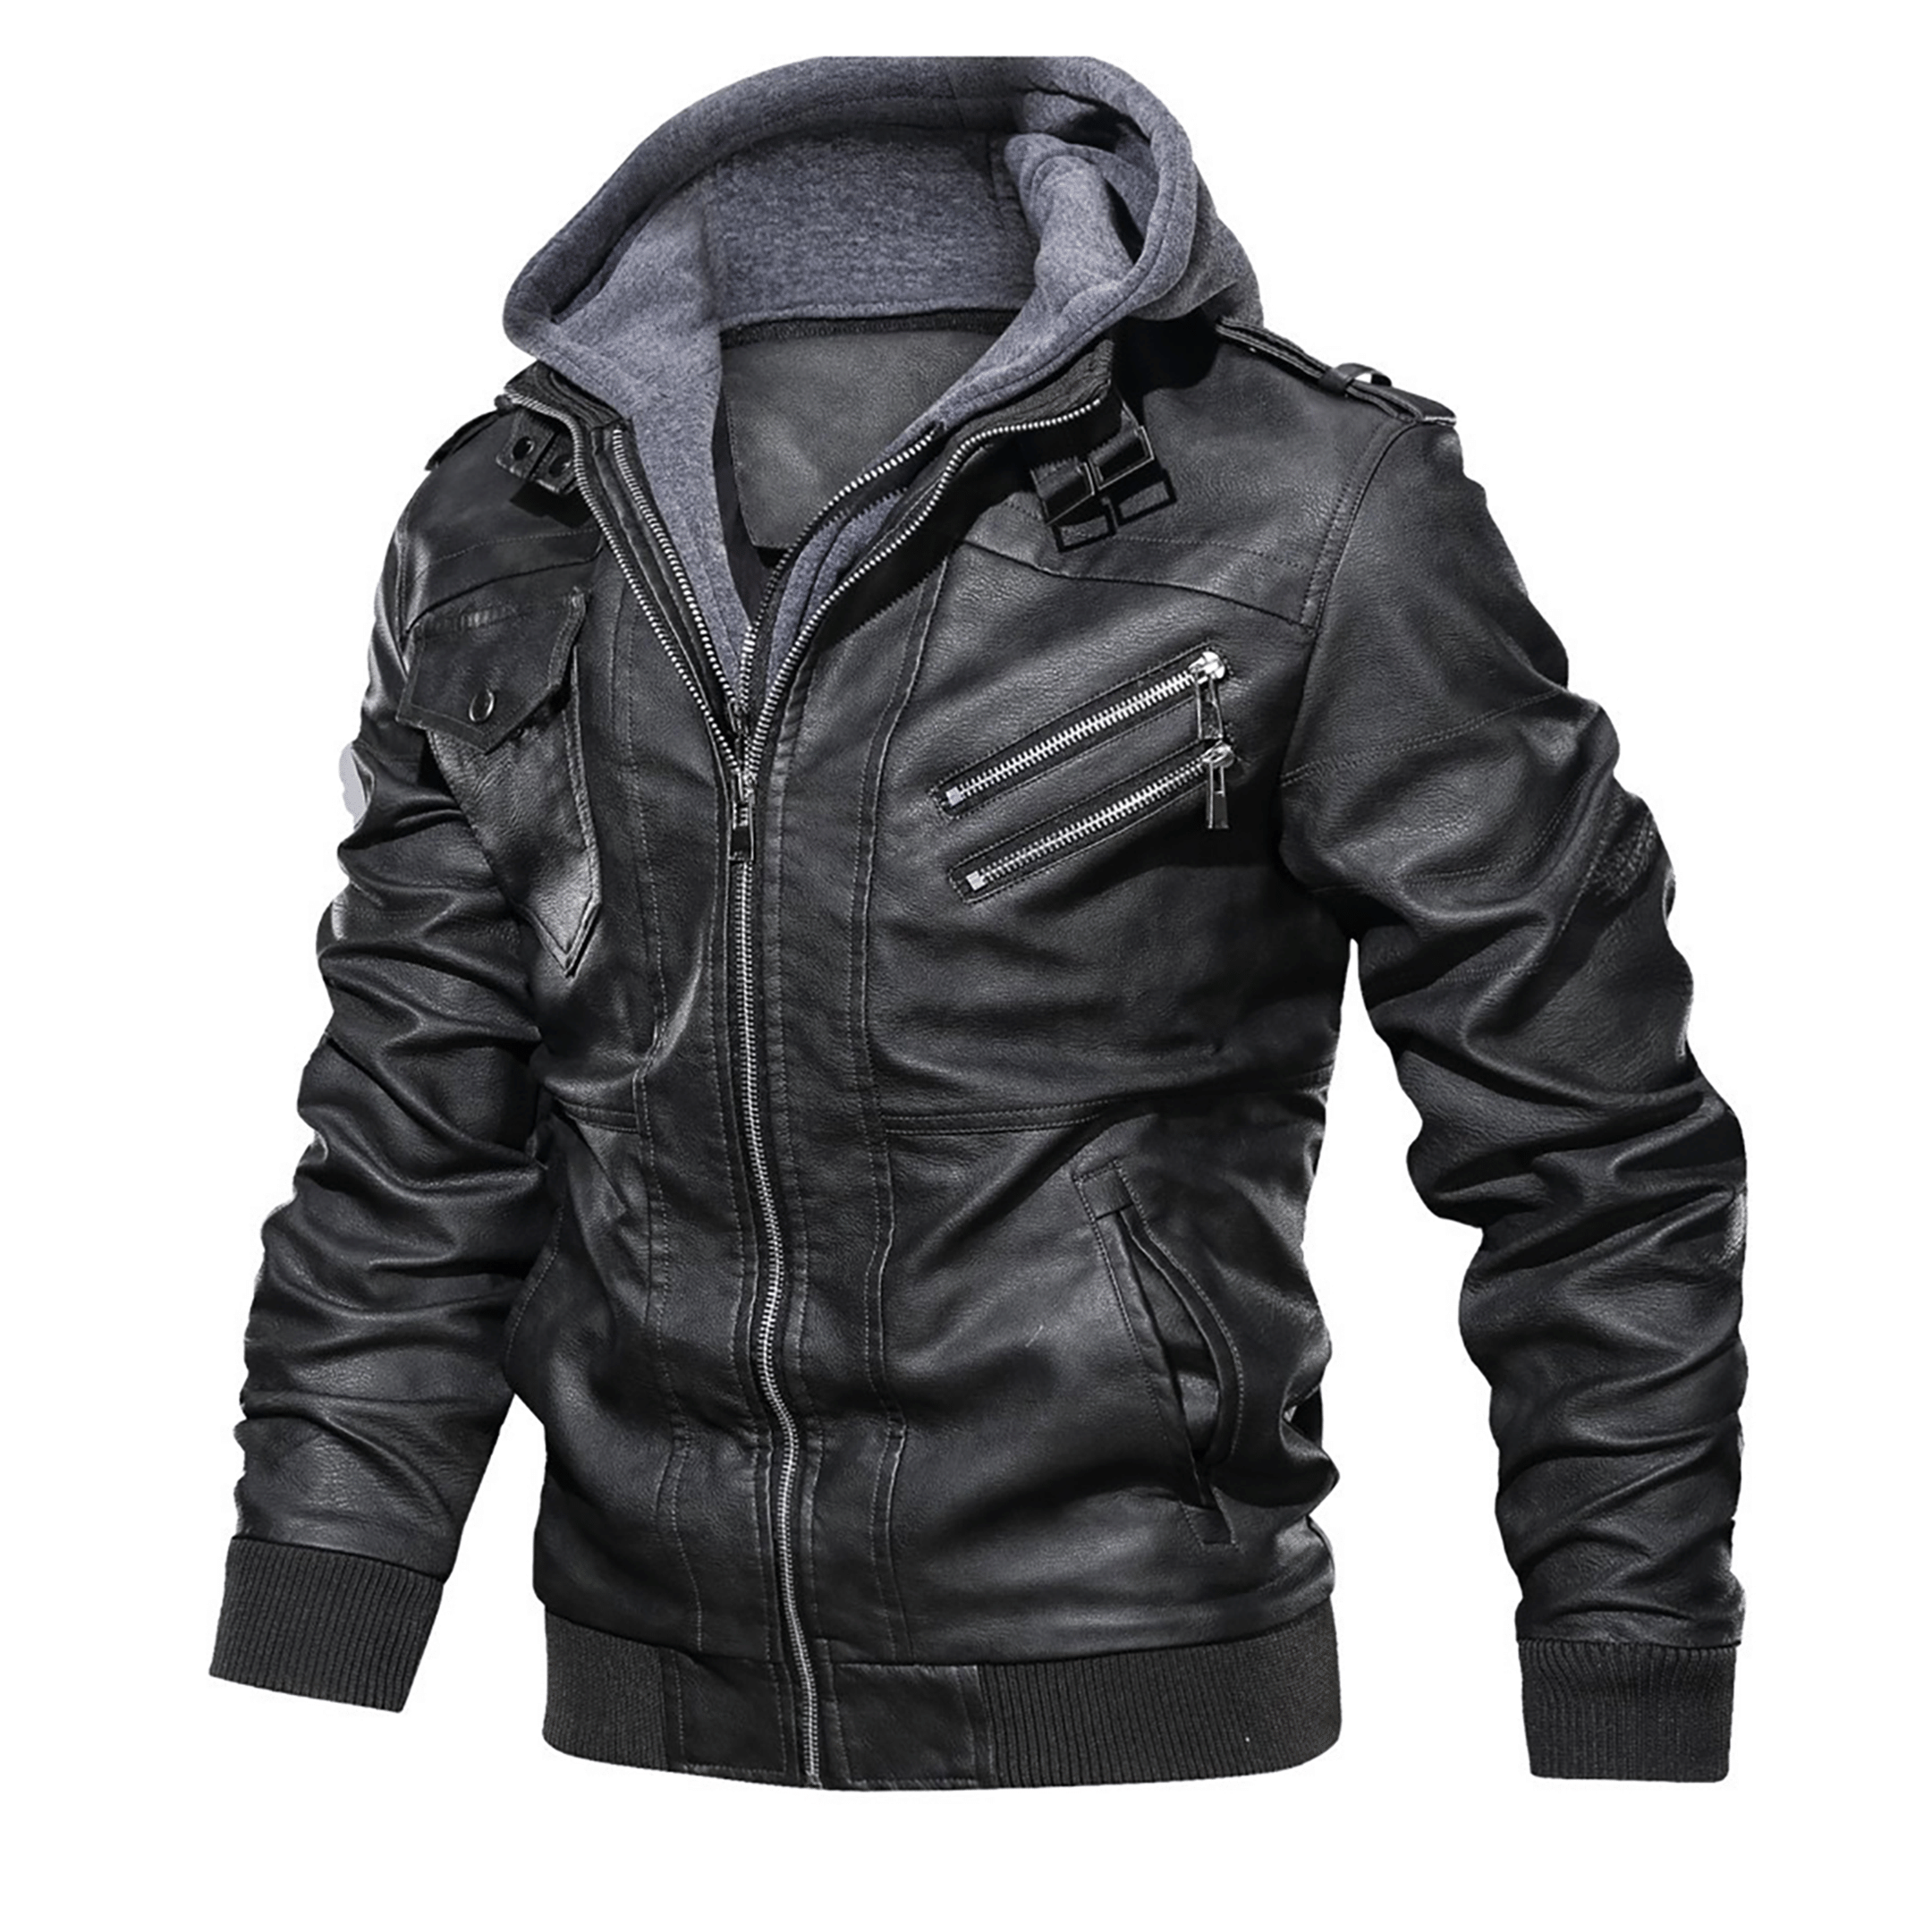 Top leather jackets and latest products 309